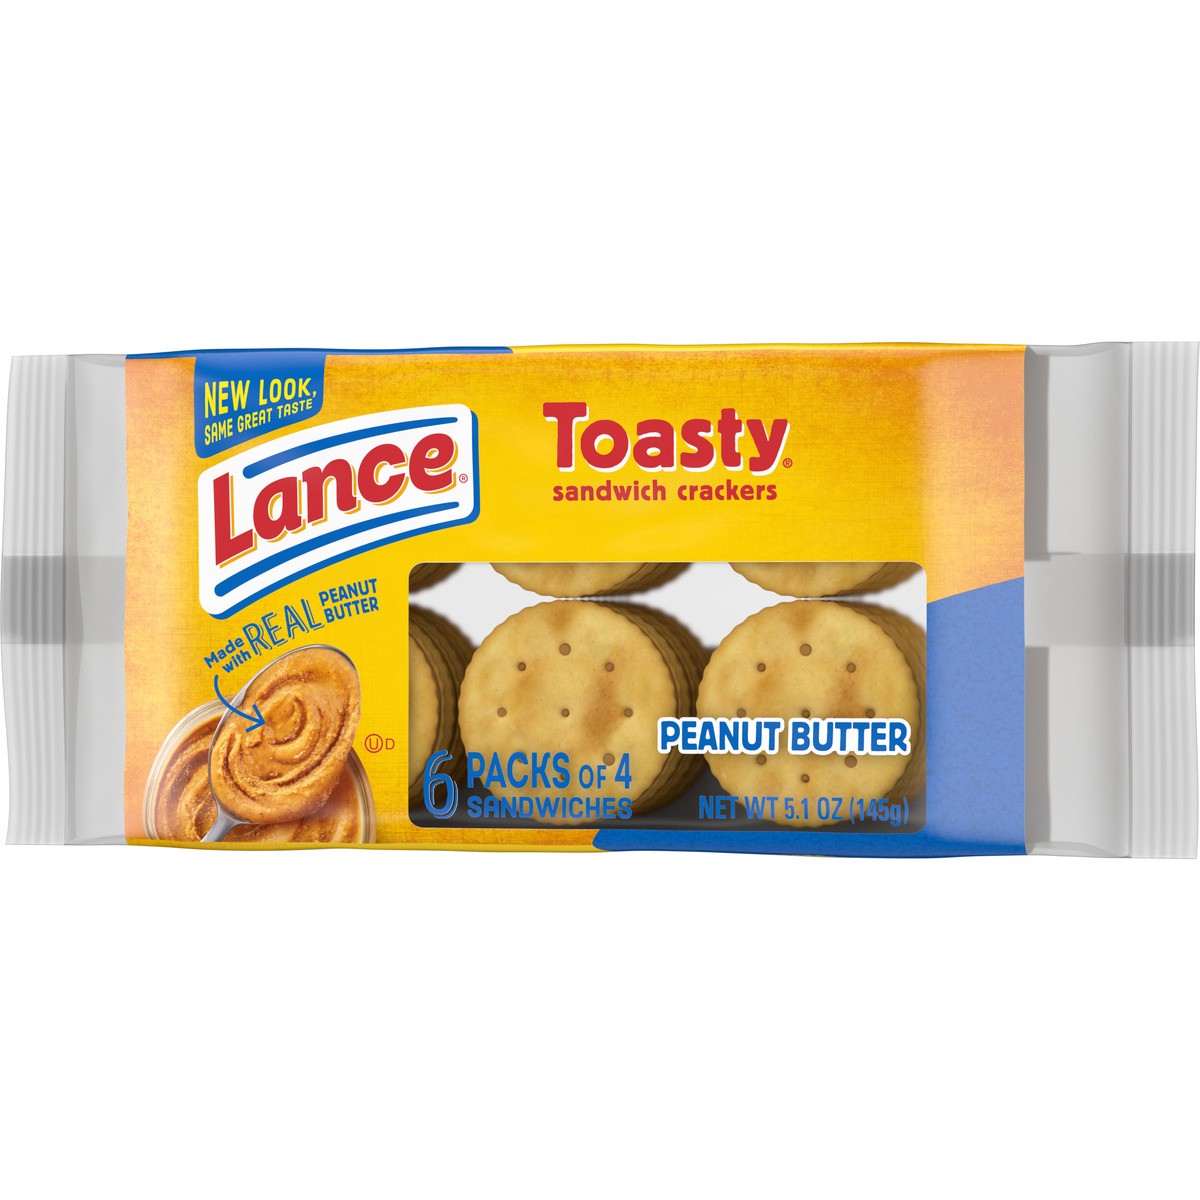 slide 7 of 11, Lance Sandwich Crackers, Toasty Peanut Butter, 6 Individually Wrapped Packs, 4 Sandwiches Each, 5.1 oz